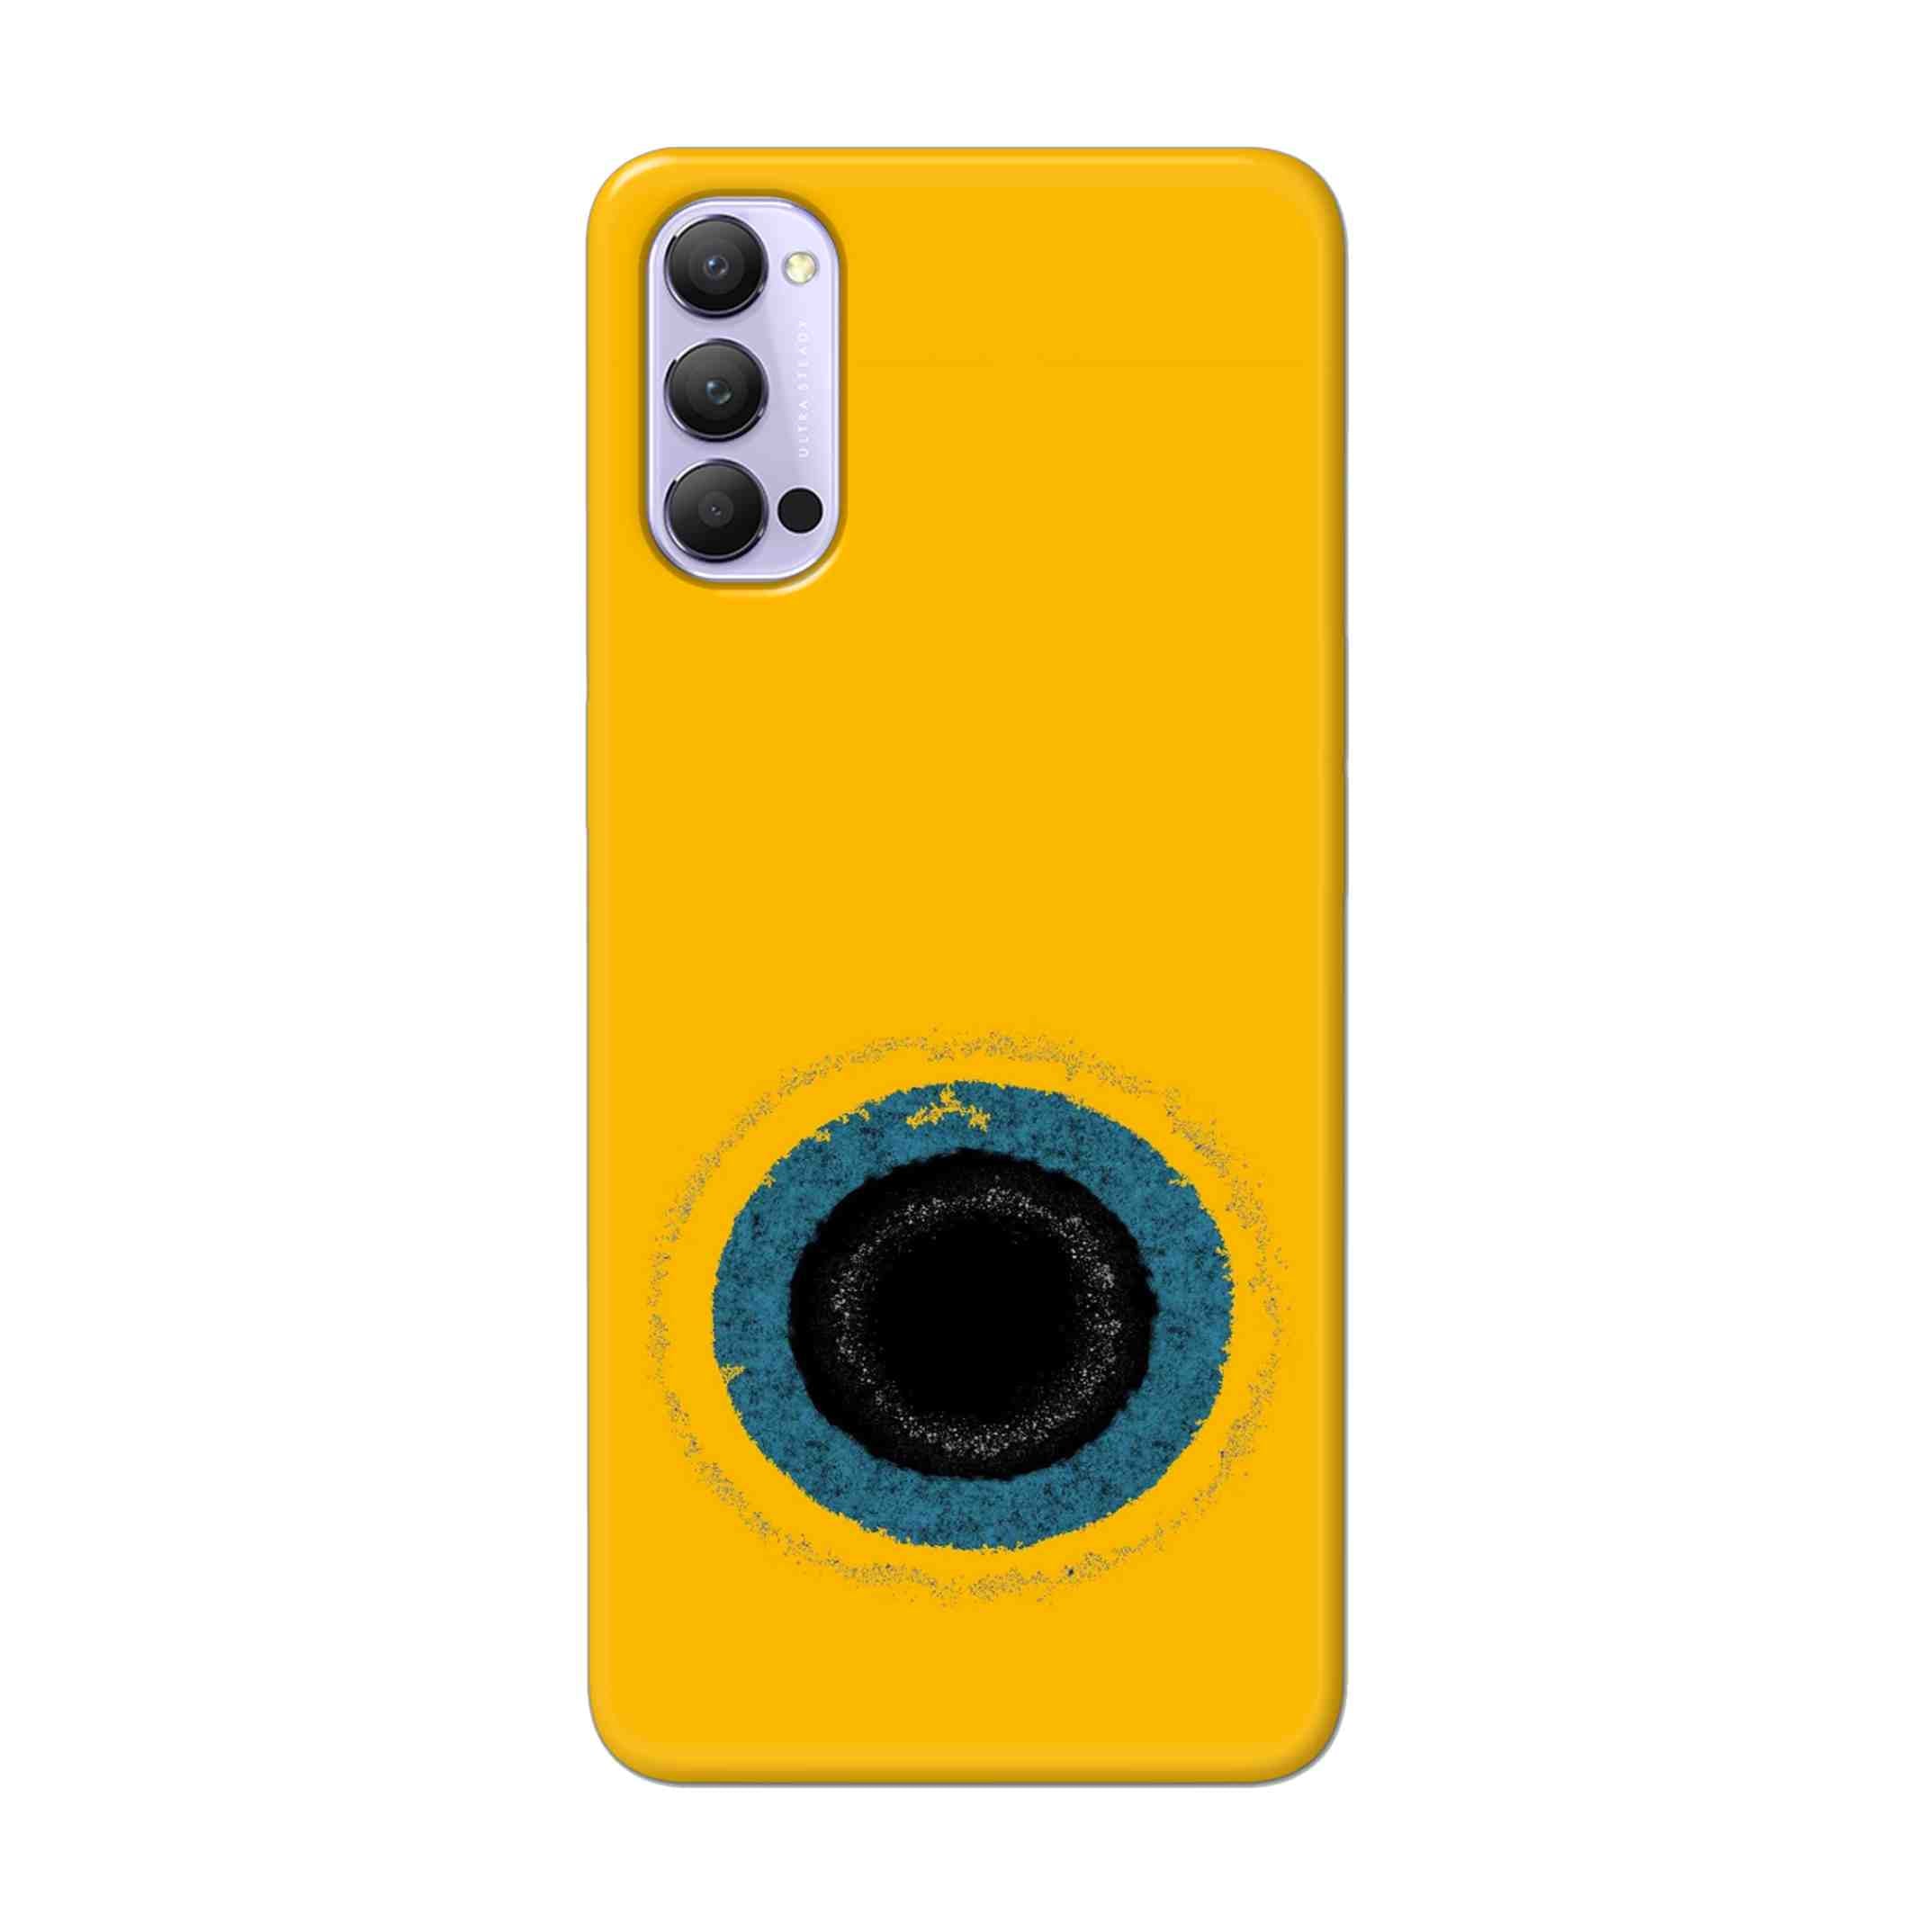 Buy Dark Hole With Yellow Background Hard Back Mobile Phone Case Cover For Oppo Reno 4 Pro Online